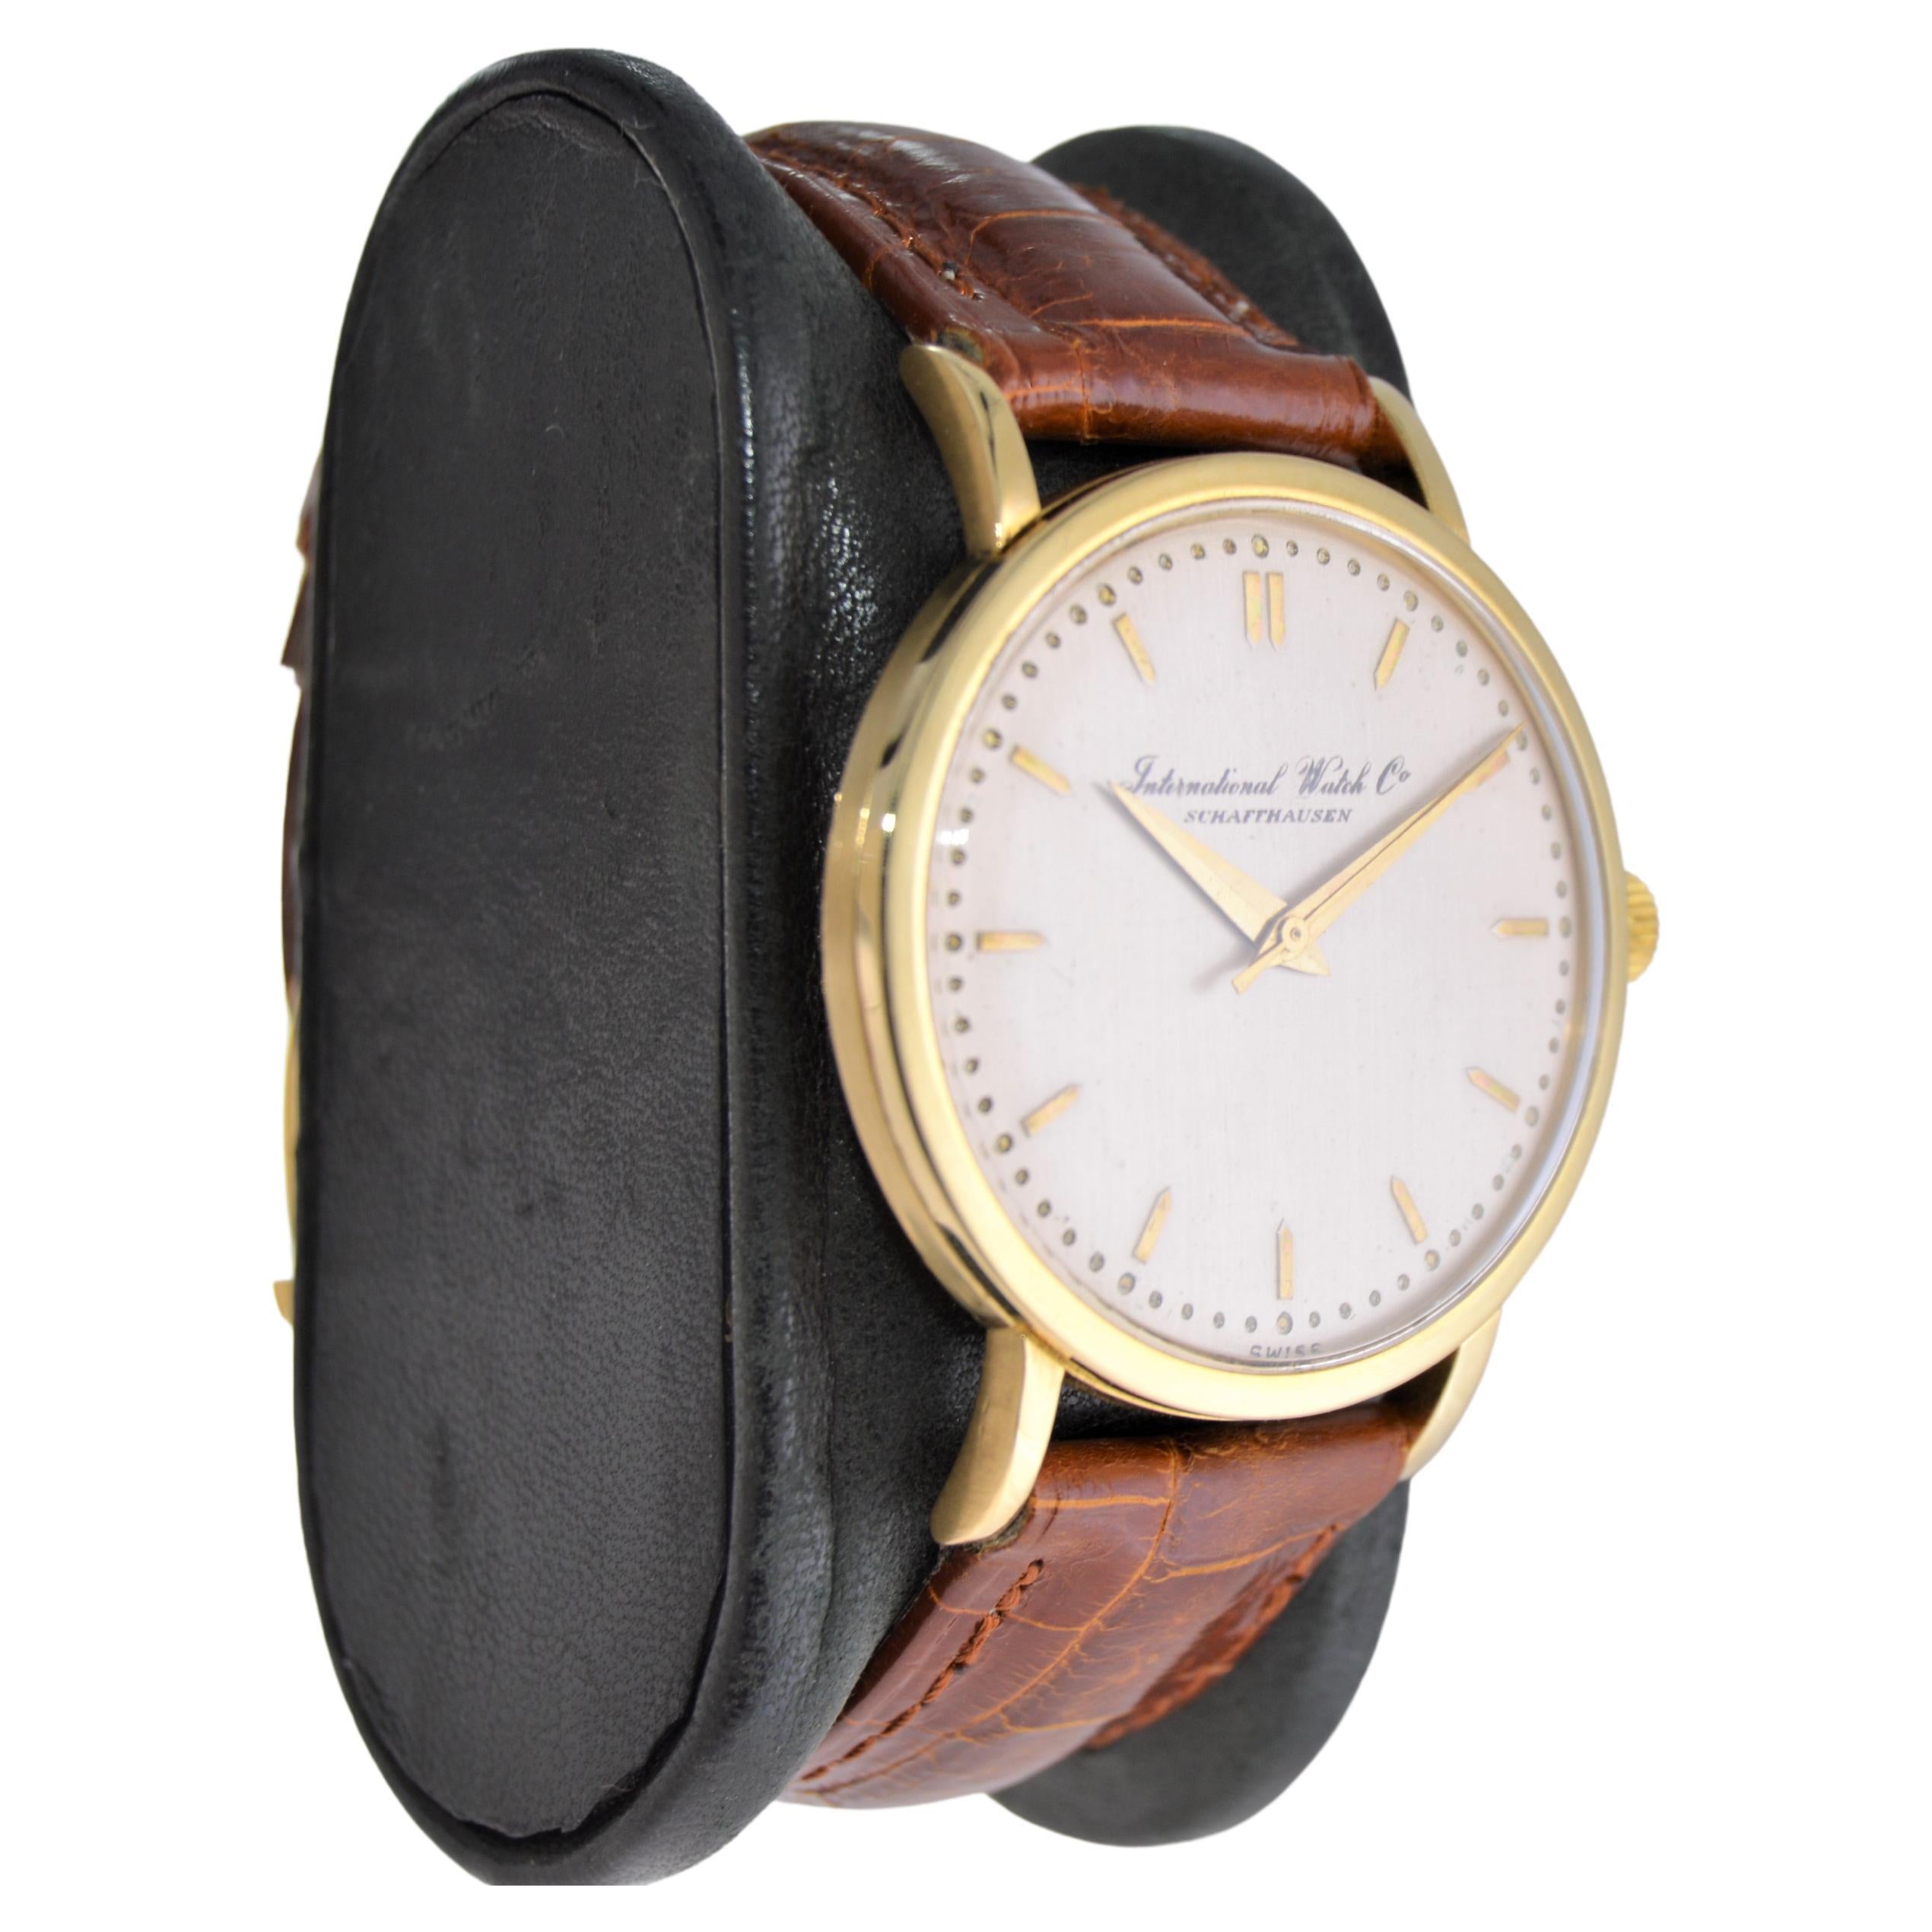 FACTORY / HOUSE: International Watch Company / Schaffhausen 
STYLE / REFERENCE: Art Deco / Round Dress Watch
METAL / MATERIAL: 18kt. Solid Gold 
CIRCA / YEAR: 1940's
DIMENSIONS / SIZE: Length 42mm x Diameter 35mm
MOVEMENT / CALIBER: Manual Winding /